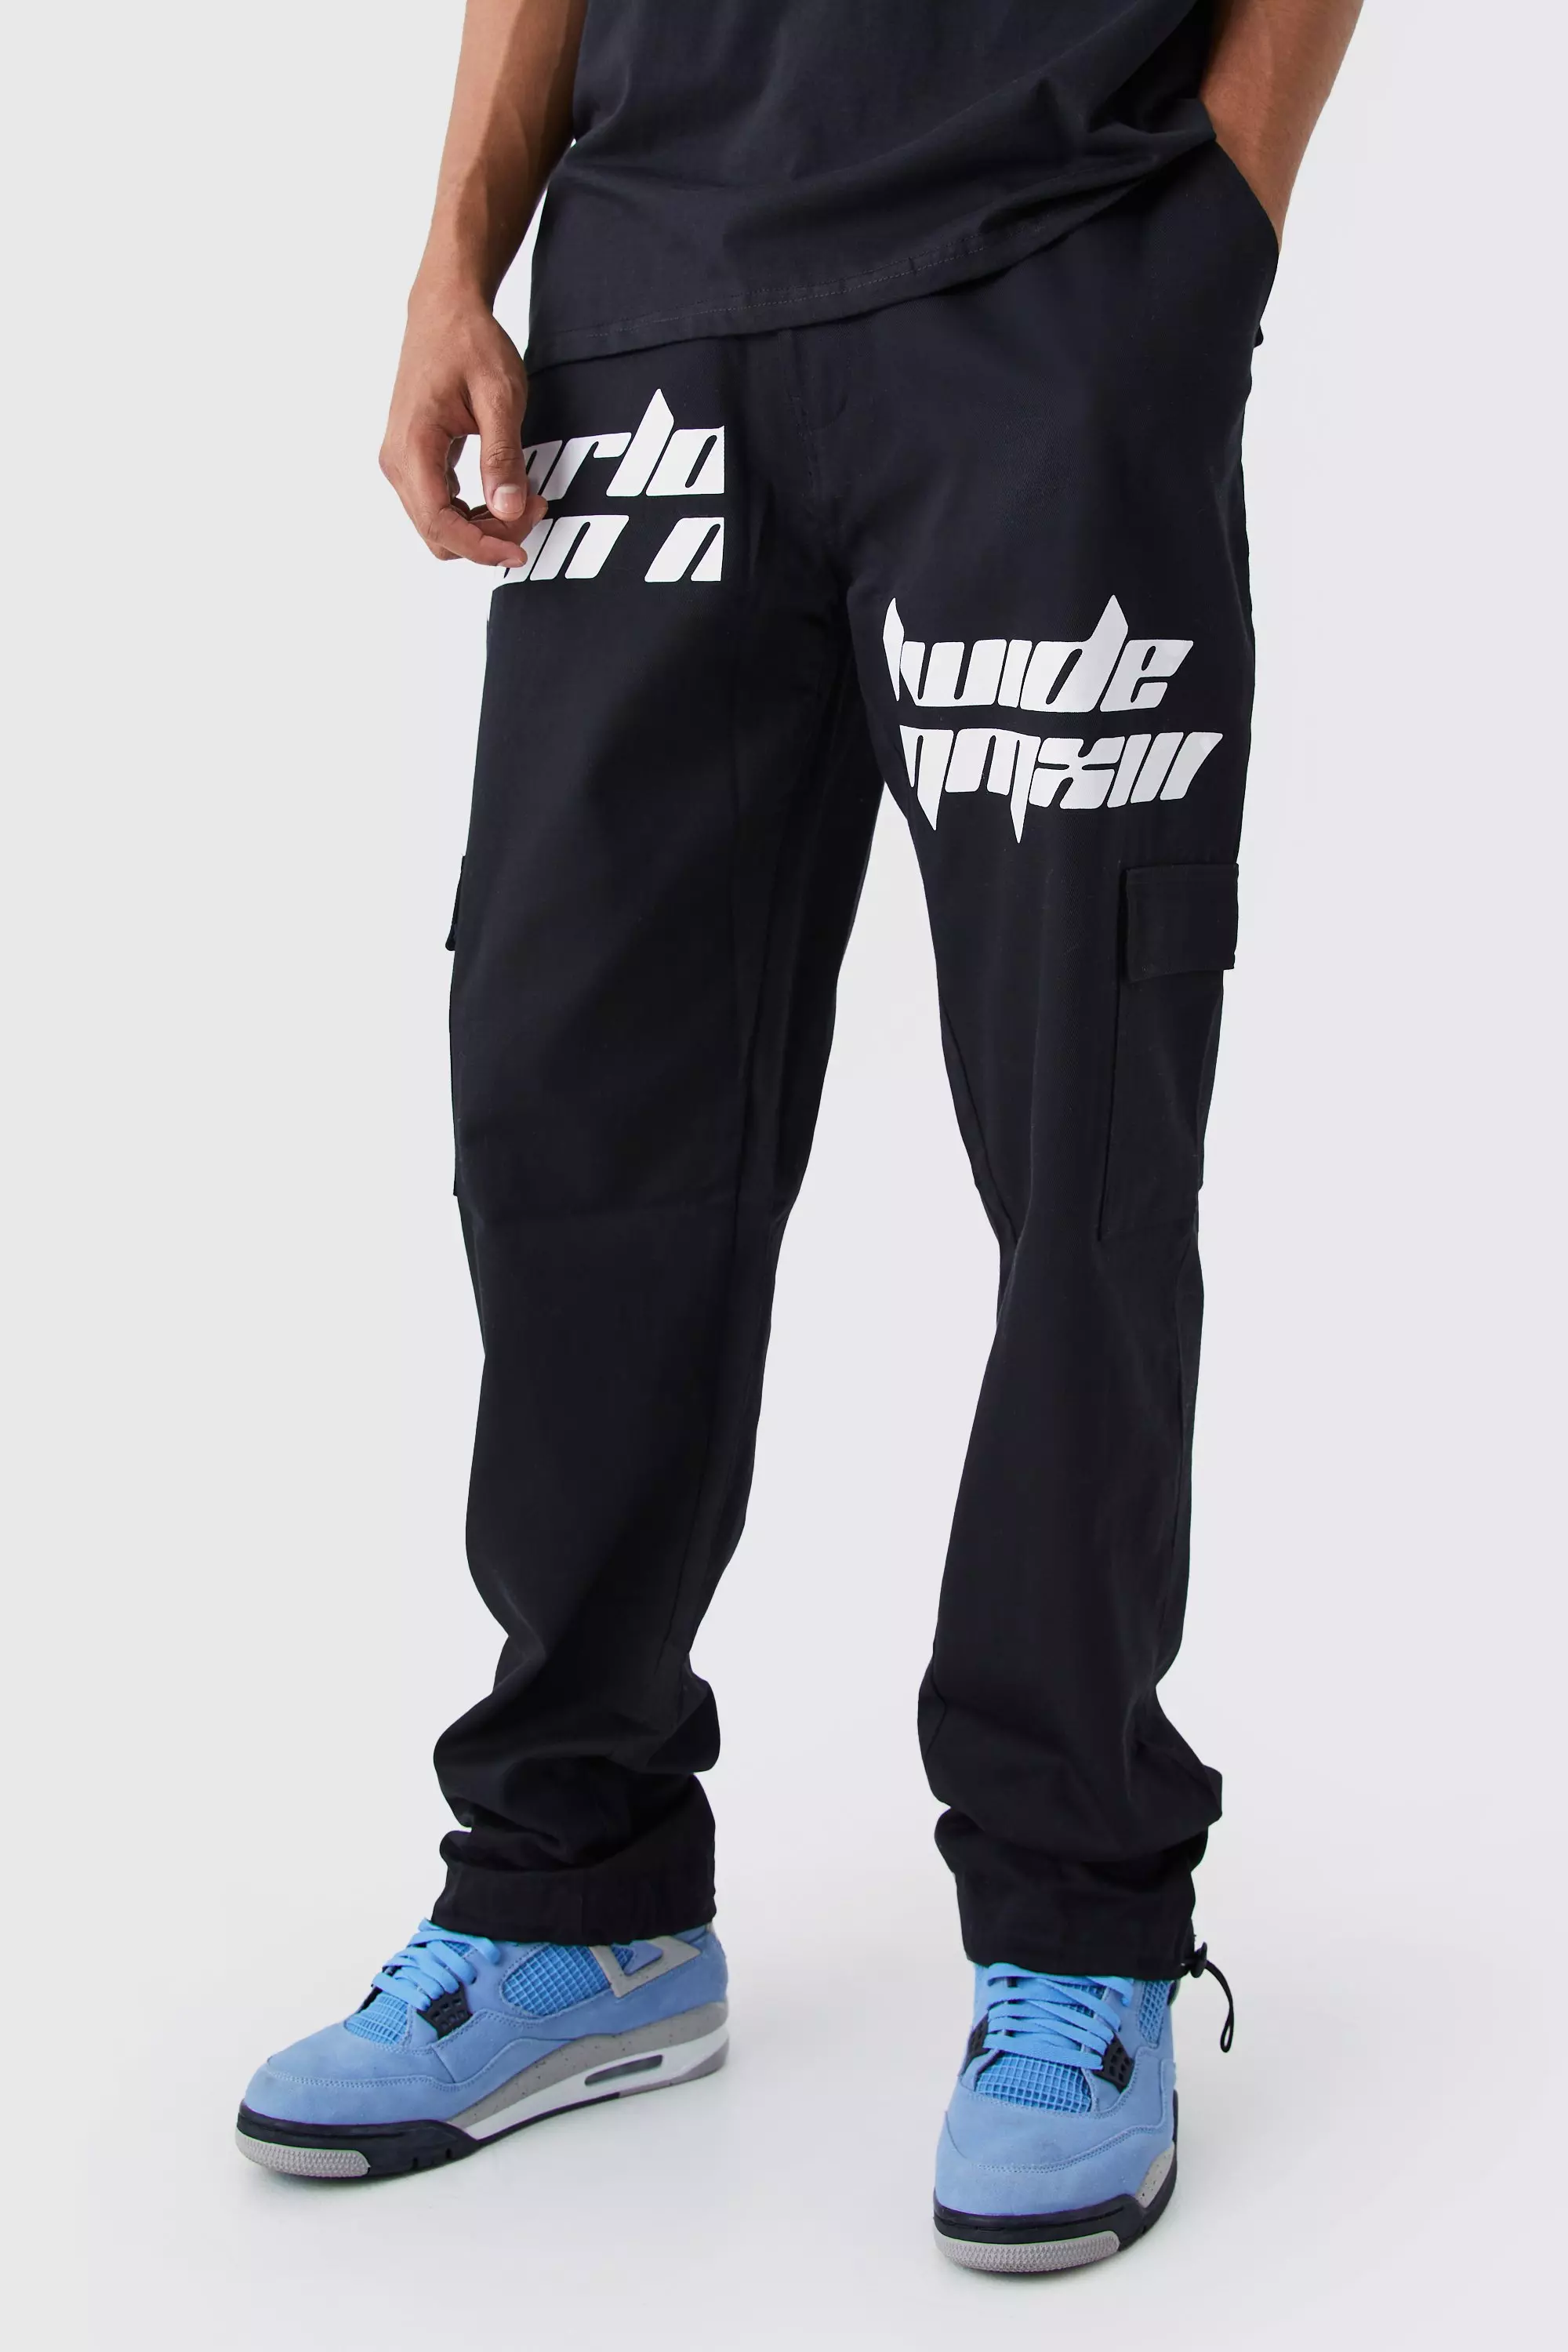 Tall Relaxed Cargo Spliced Text Print Pants Black